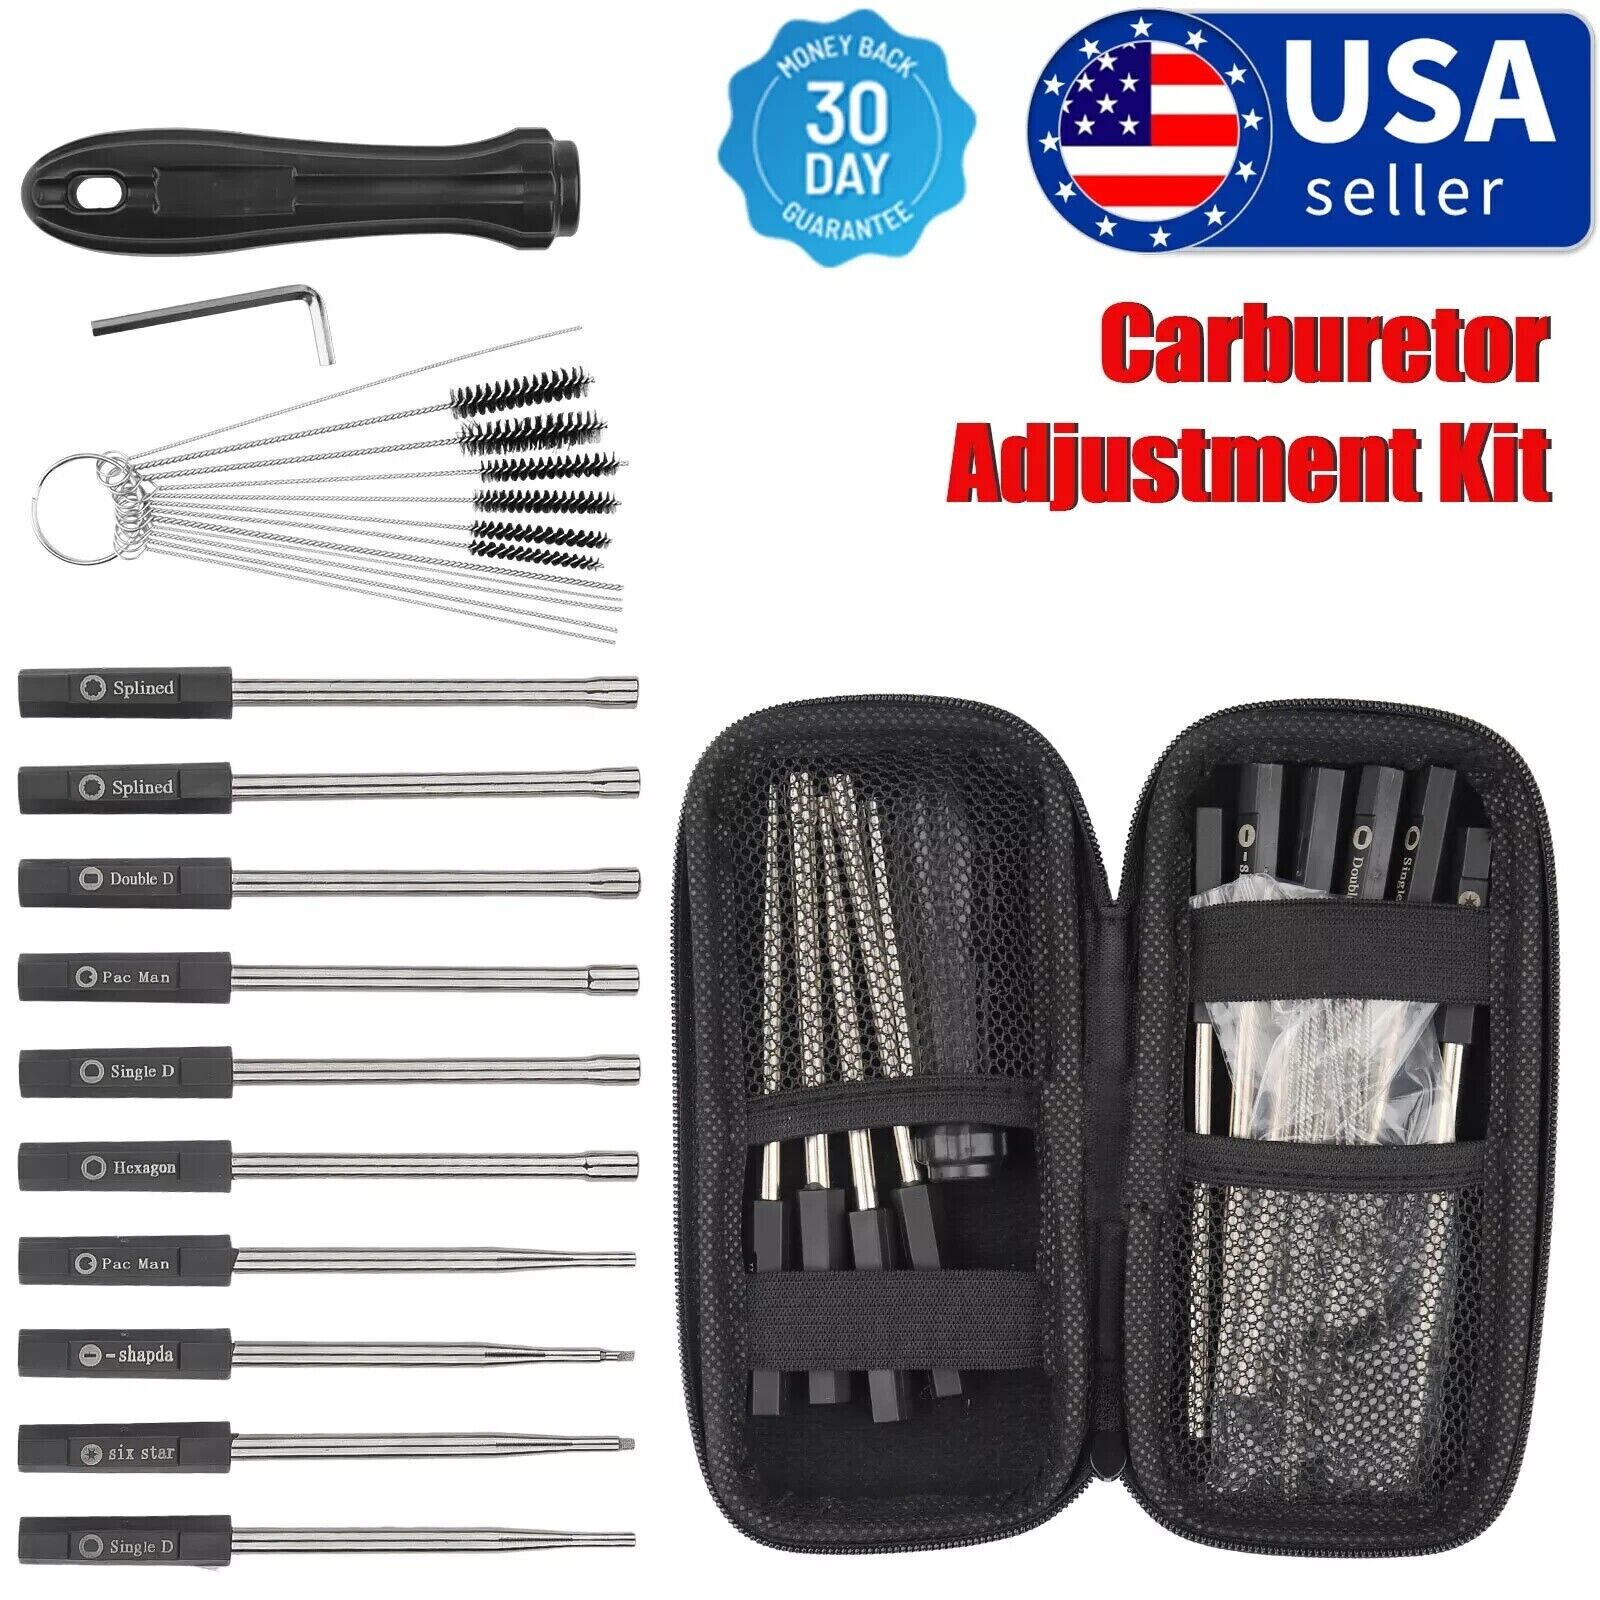 13 Pcs Carburetor Adjustment Tool Kit for Common 2 Cycle Small Engine US Stock